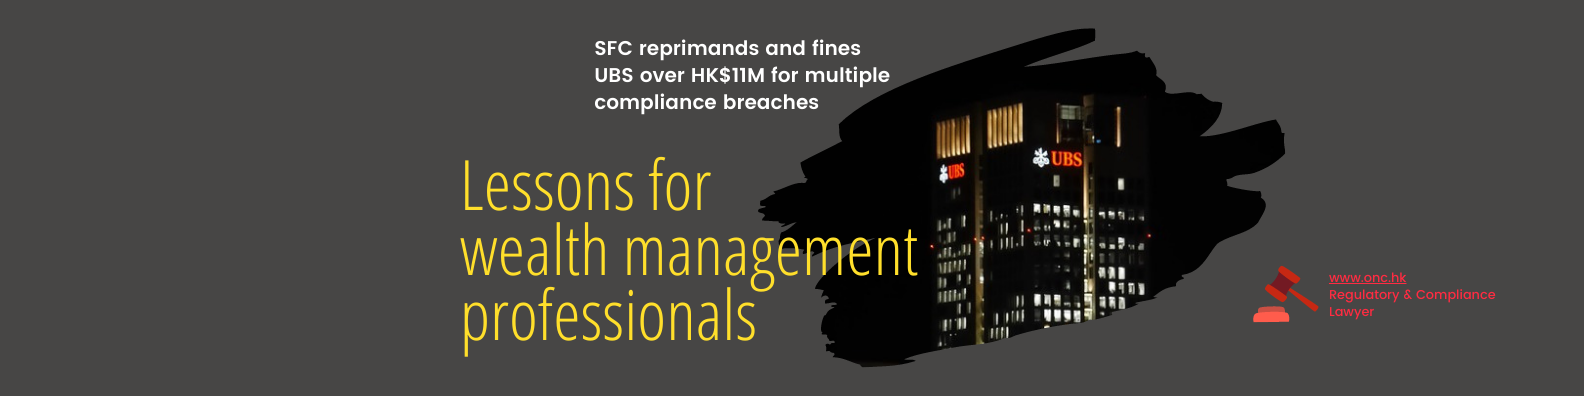 SFC reprimands and fines UBS over HK$11M for multiple compliance breaches – Lessons for wealth management professionals